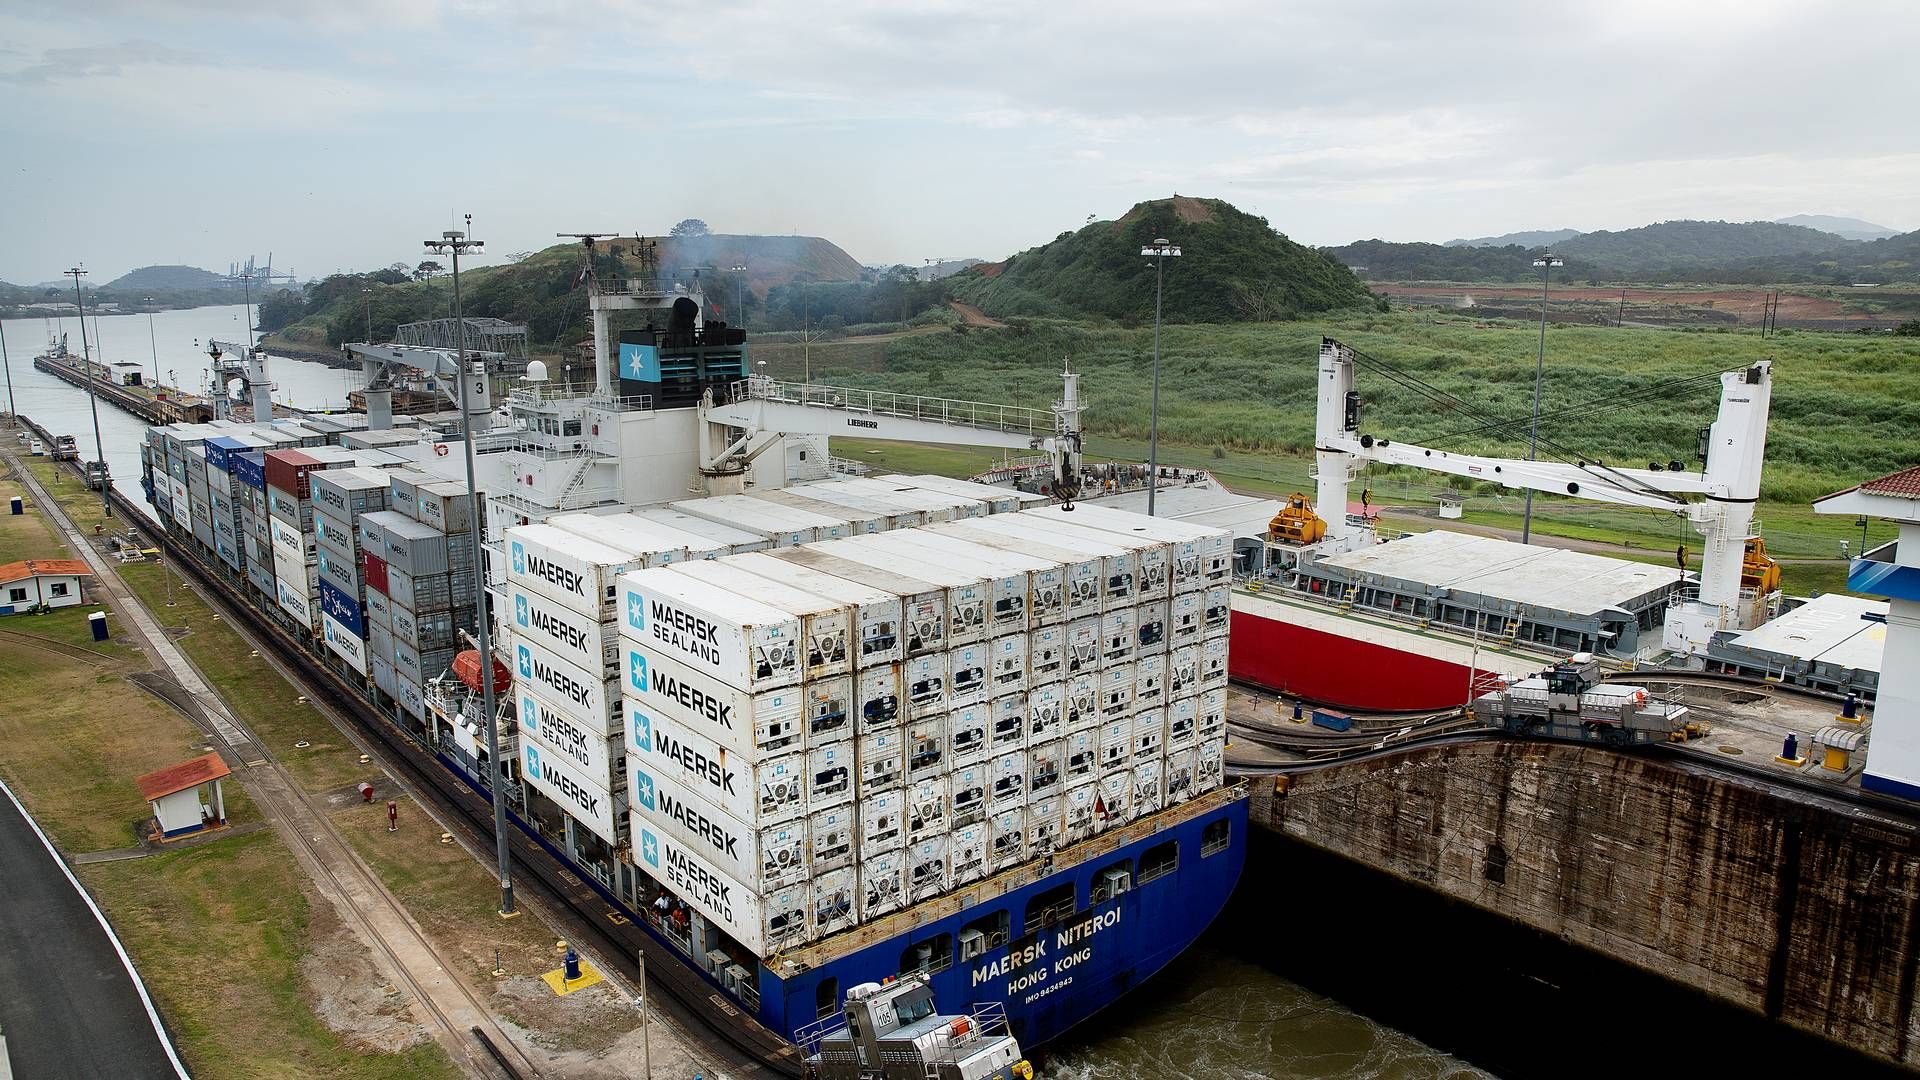 Unlike dry bulk carriers, container ships typically operate on fixed schedules, making it easier for them to book transit times through the Panama Canal. As a result, many dry bulk operators have chosen to reroute their vessels, according to Bimco's analysis.